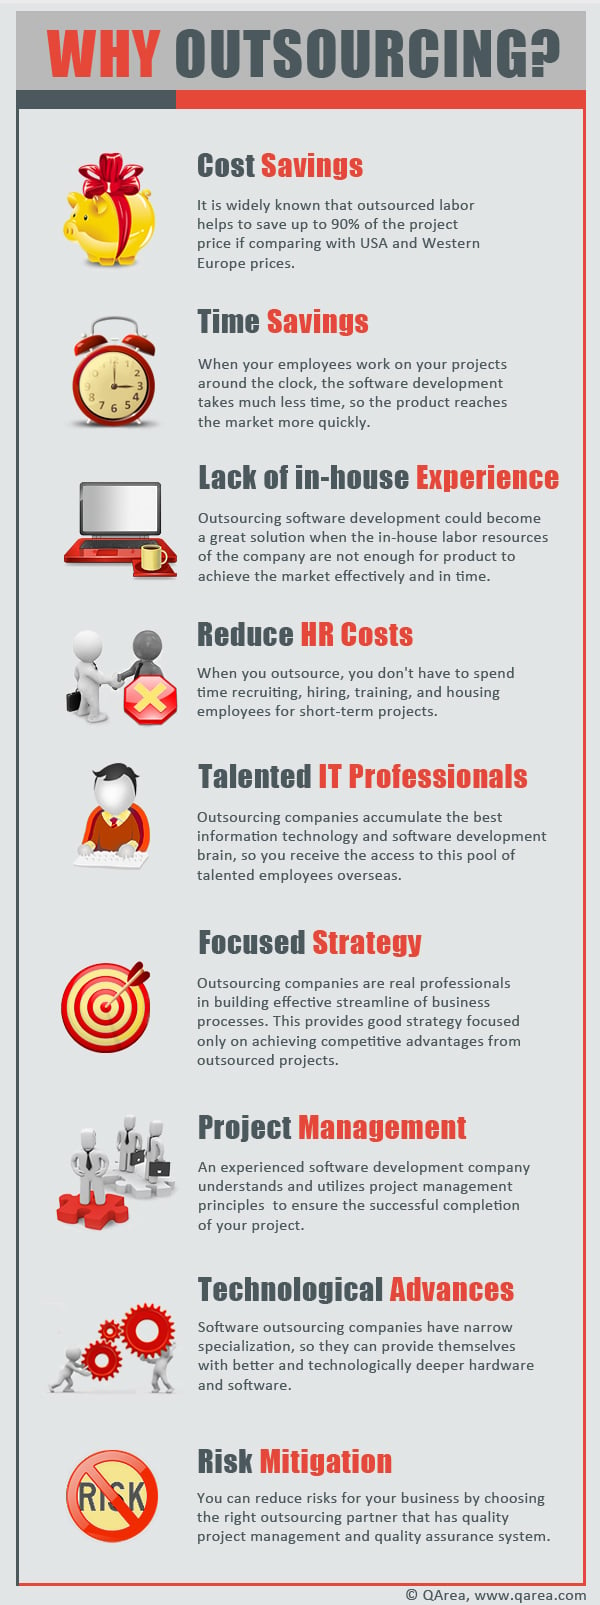 9-reasons-to-consider-outsourcing.jpg